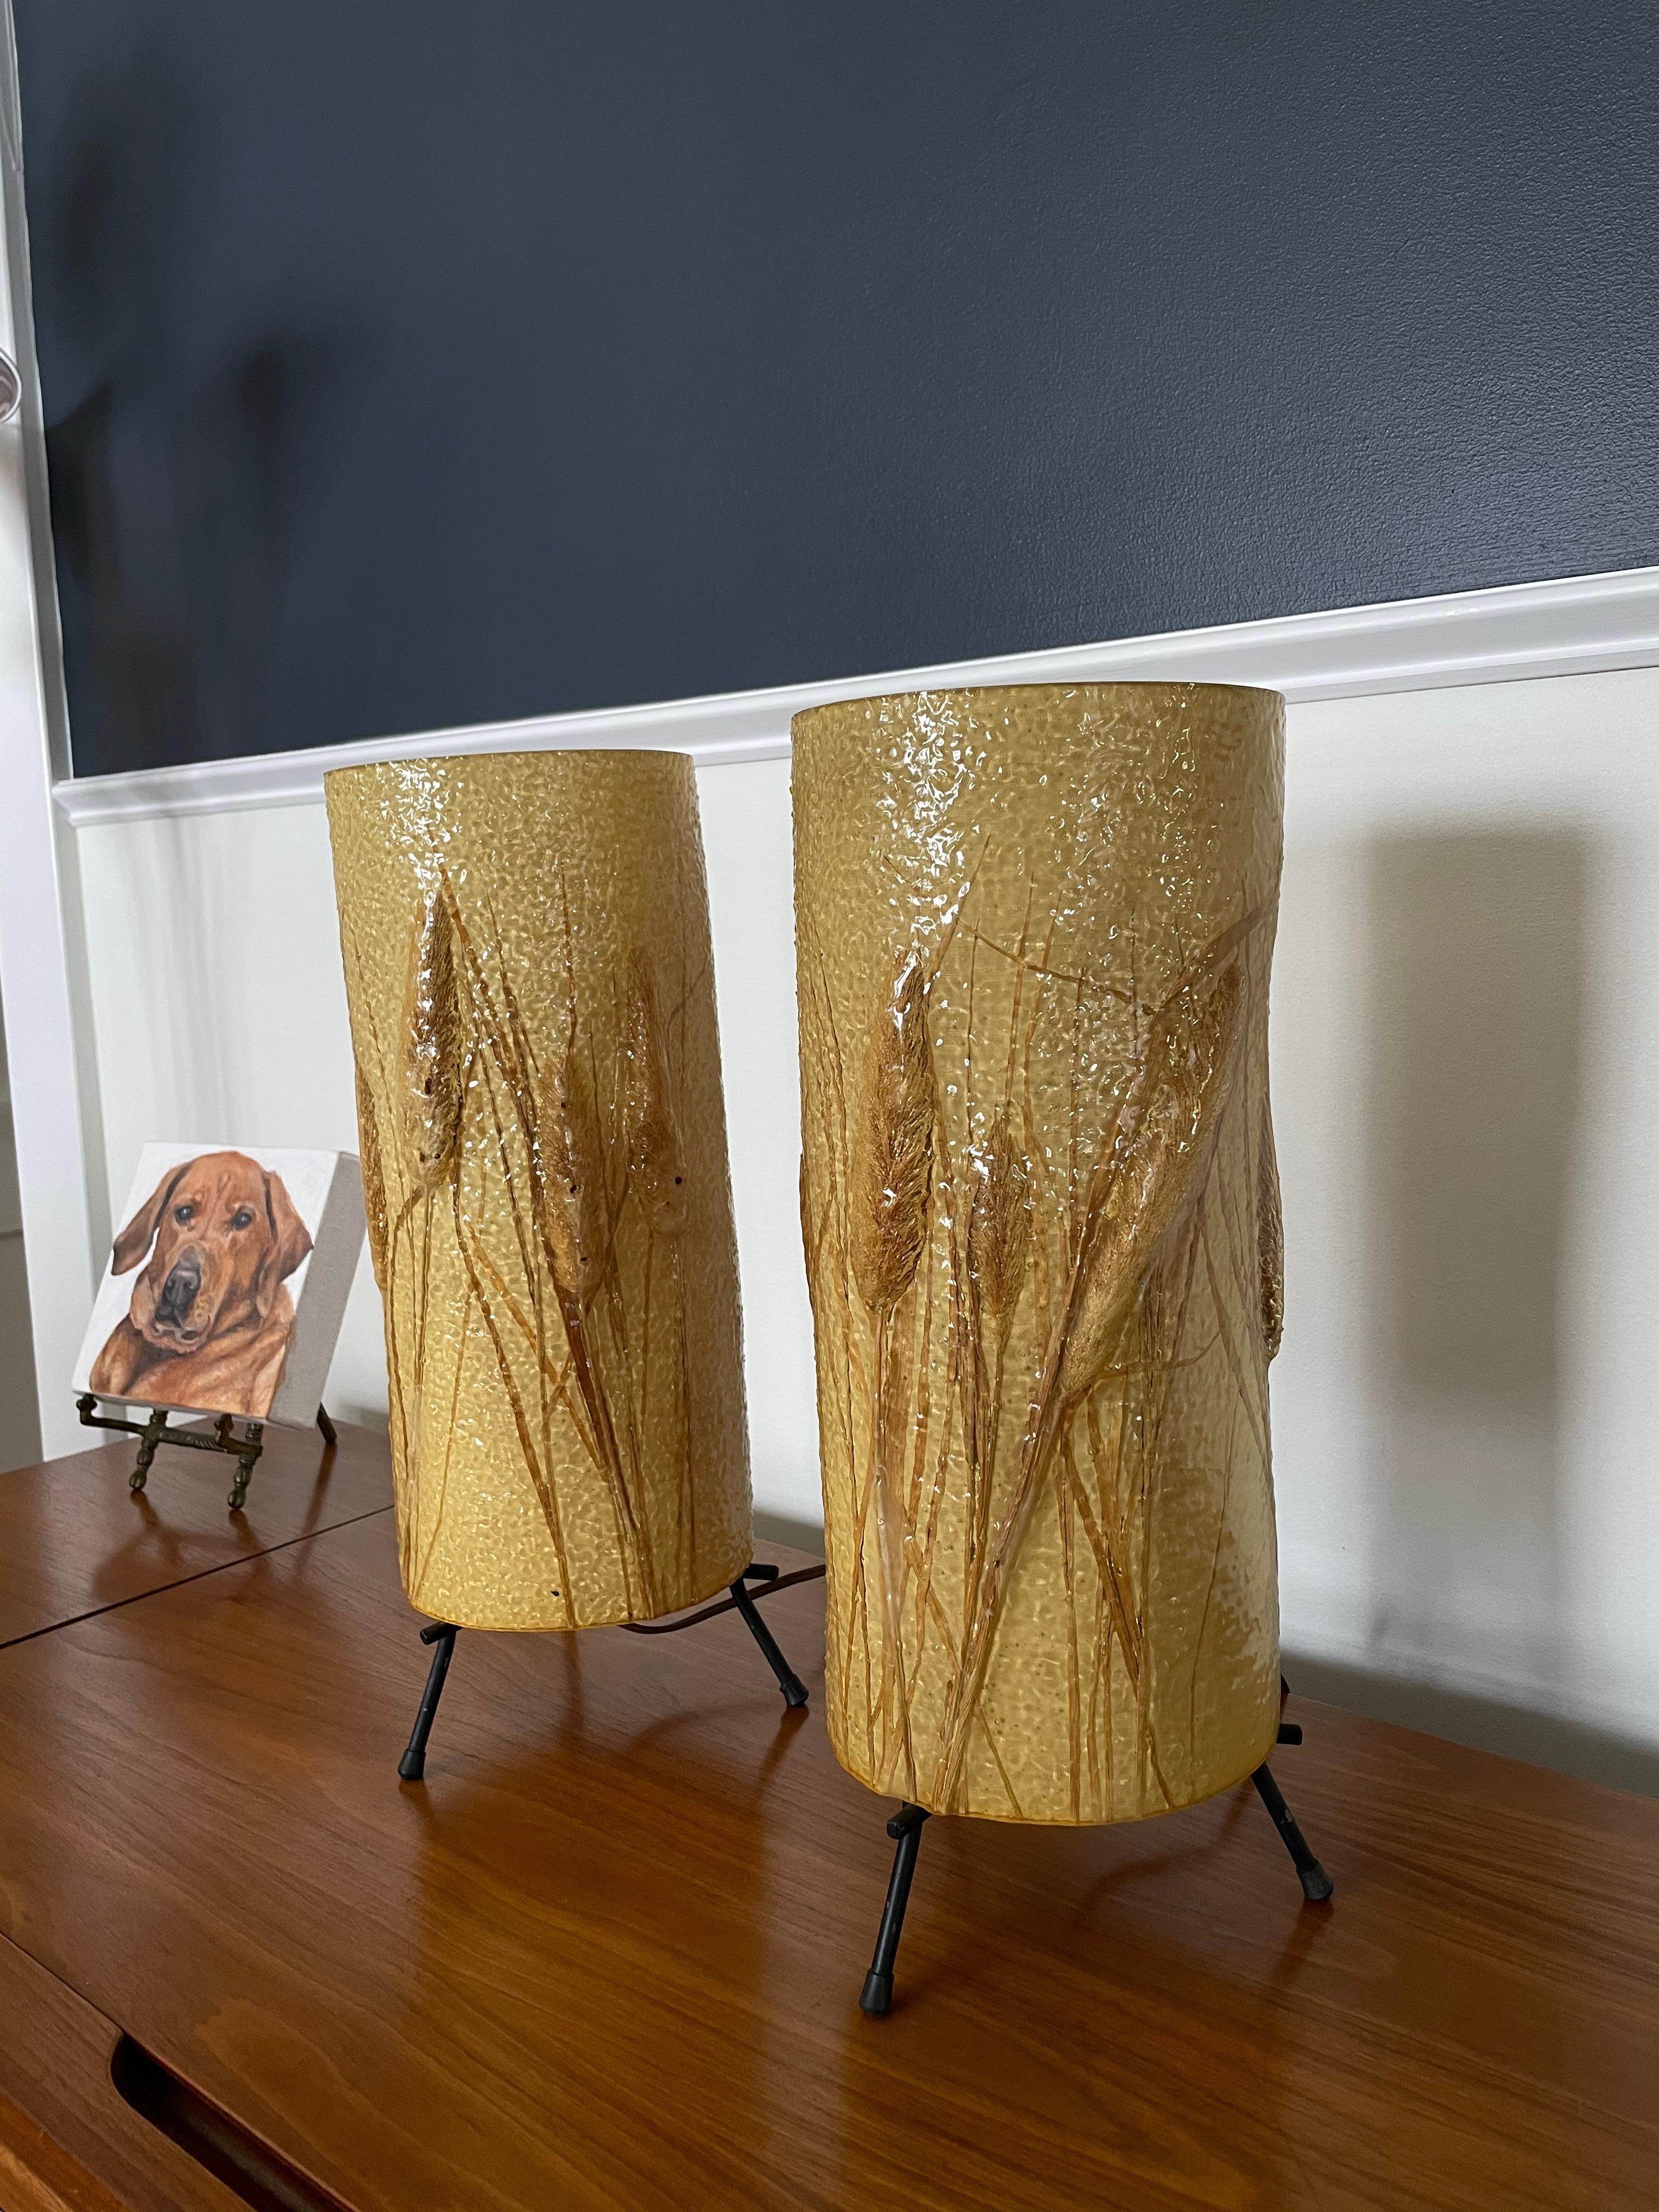 Awesome Mid Century Cattail lamps made out of a textured rubber material wrapping canvas interior . Cylindrical for 360 degree effect. Great graphics and glow.